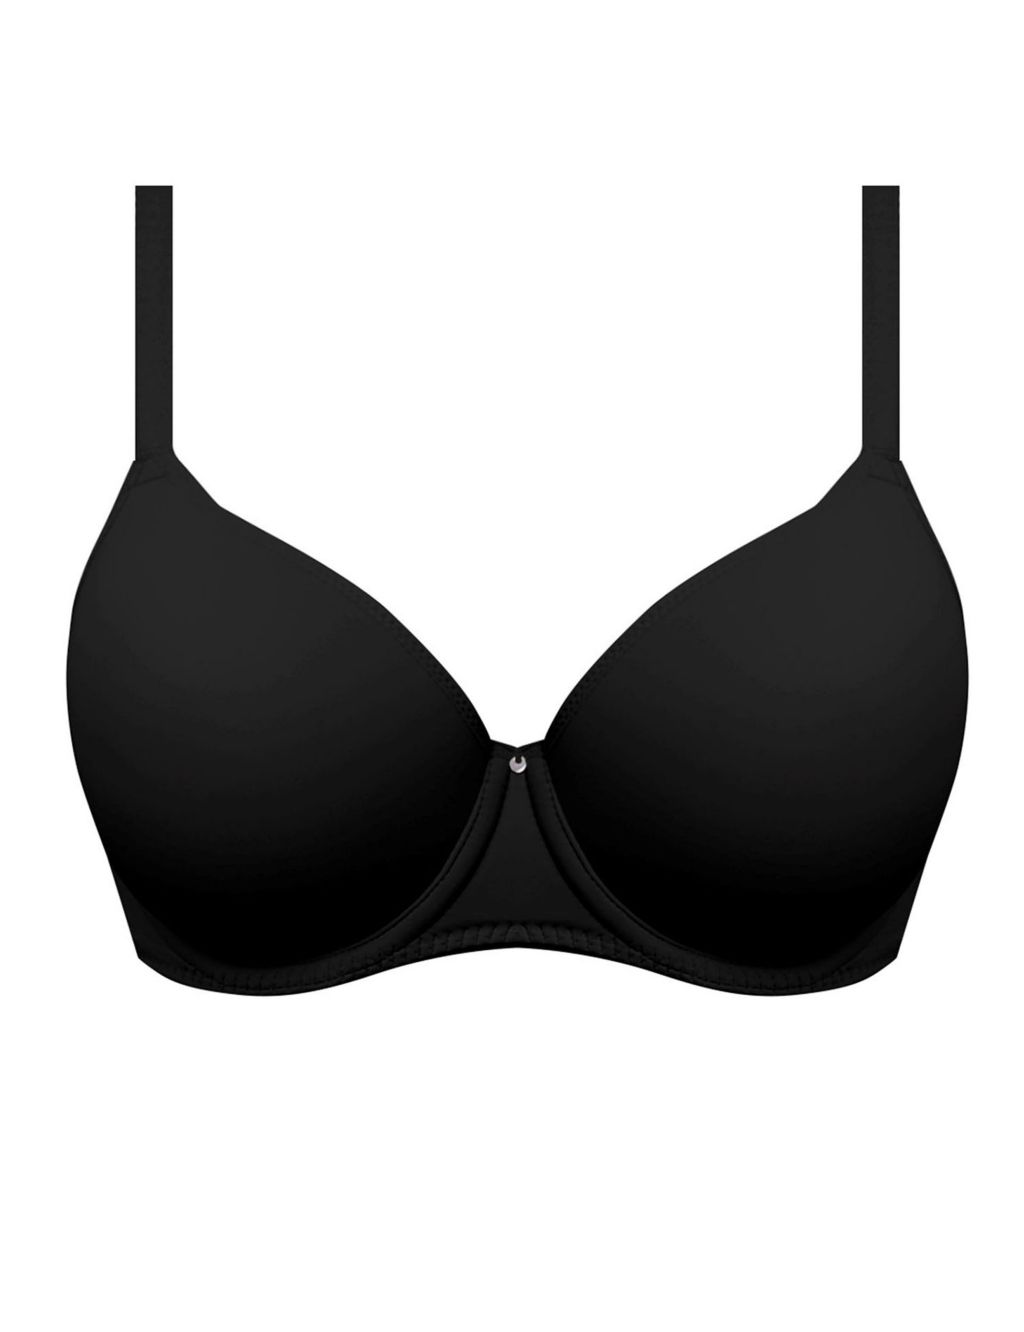 Aura Wired Full Cup T-Shirt Bra image 2